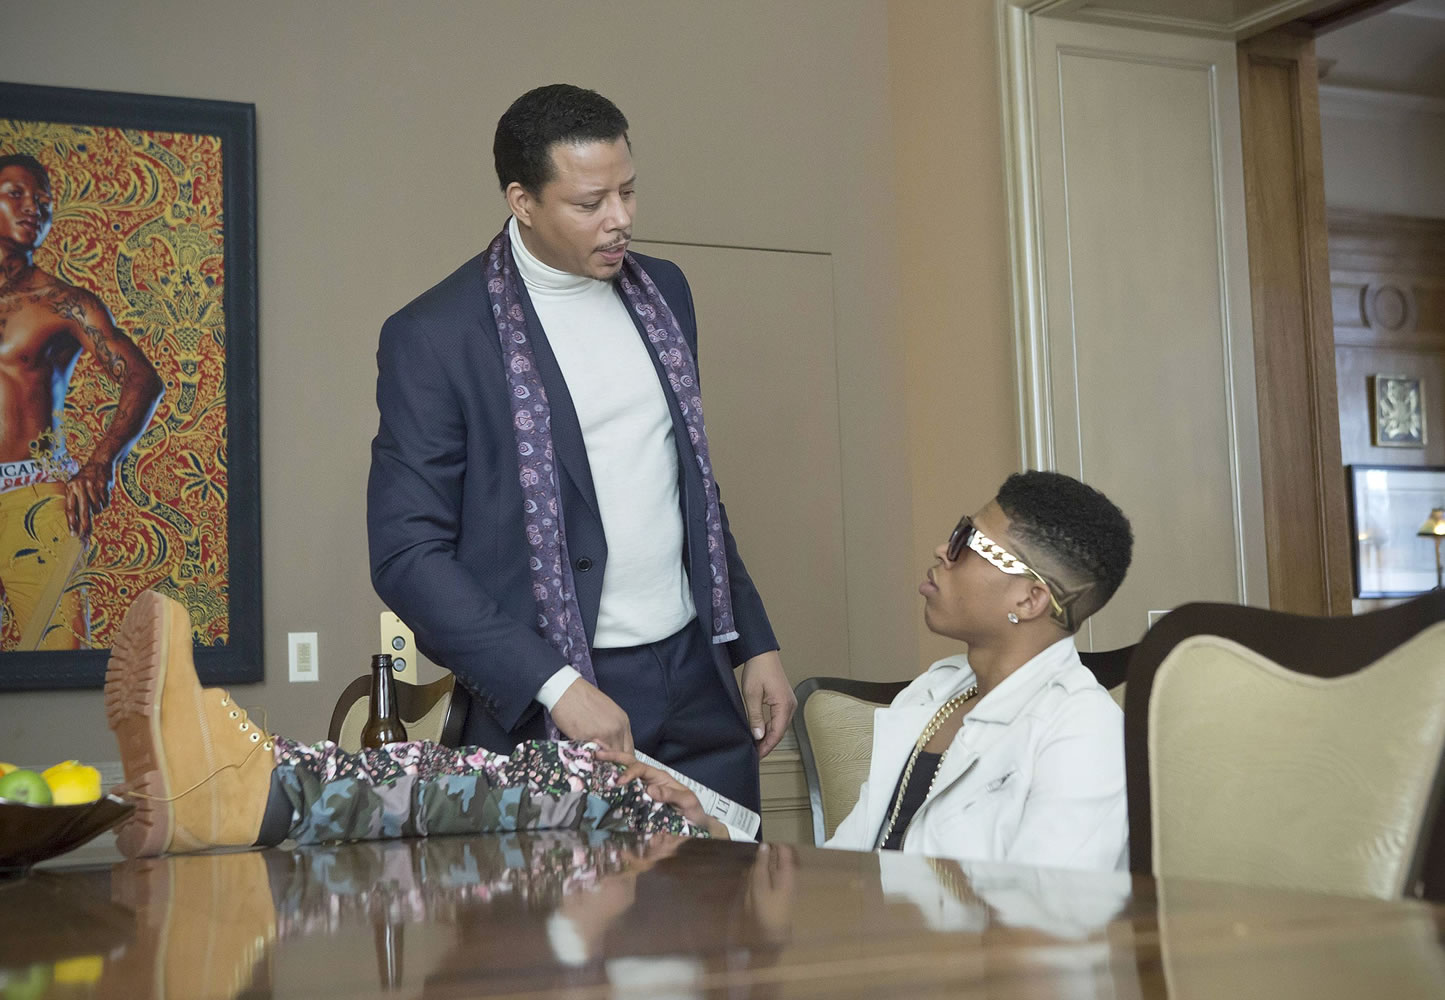 Chuck Hodes/Fox
Terrence Howard, left, and Bryshere Gray star in Fox's new &quot;Empire,&quot; about a hip-hop mogul and his family and business drama.